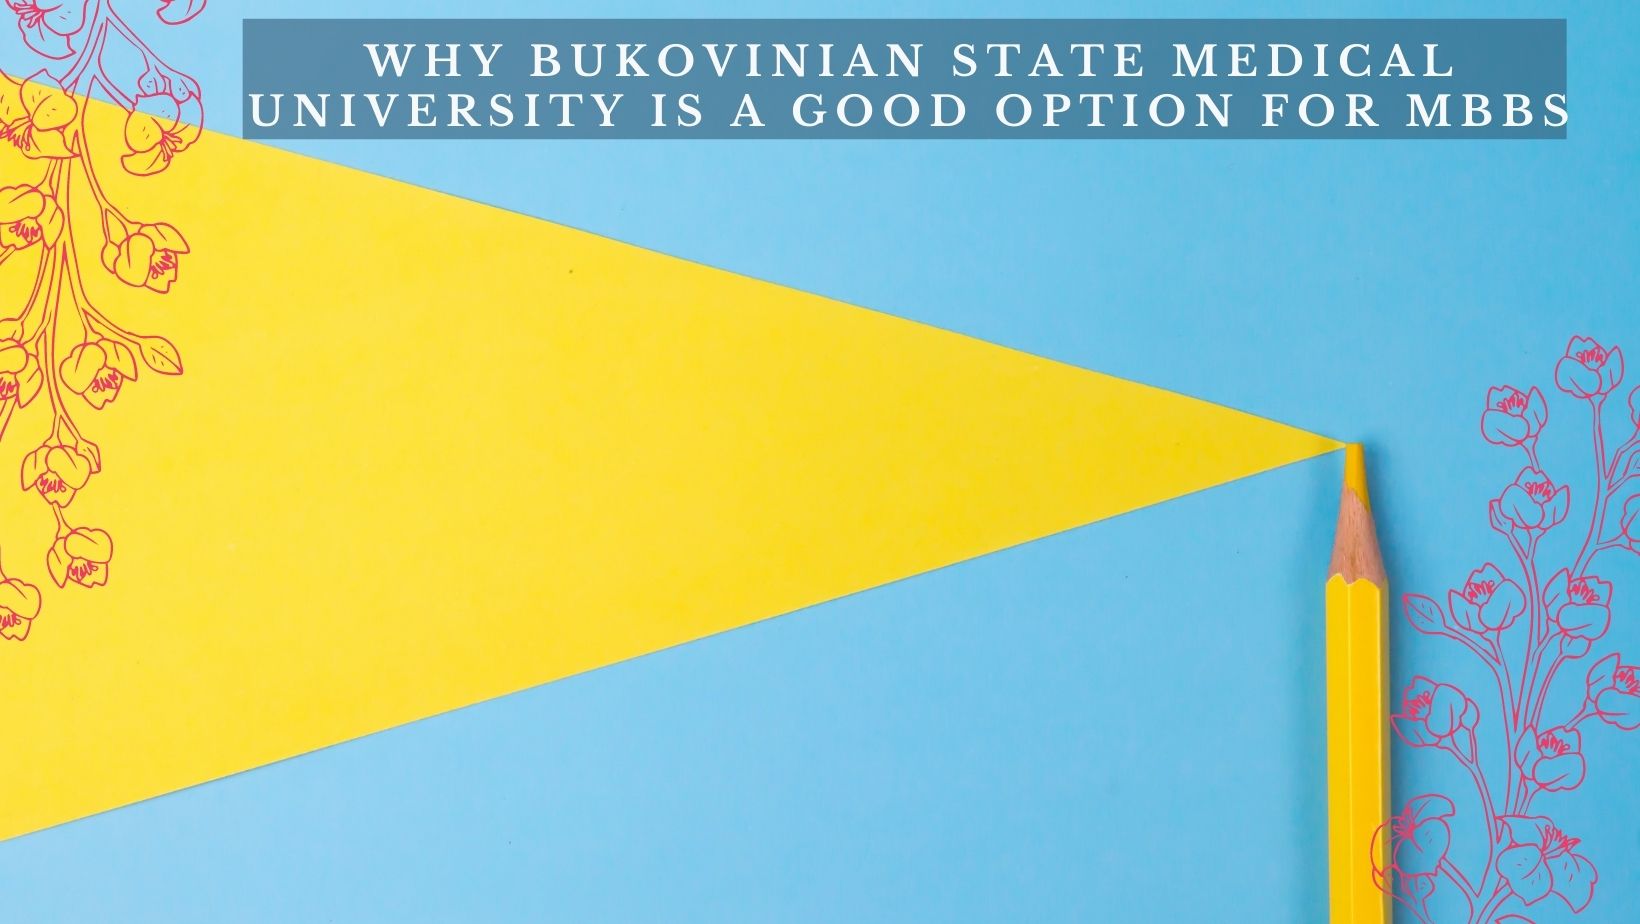 WHY BUKOVINIAN STATE MEDICAL UNIVERSITY IS A GOOD OPTION FOR MBBS